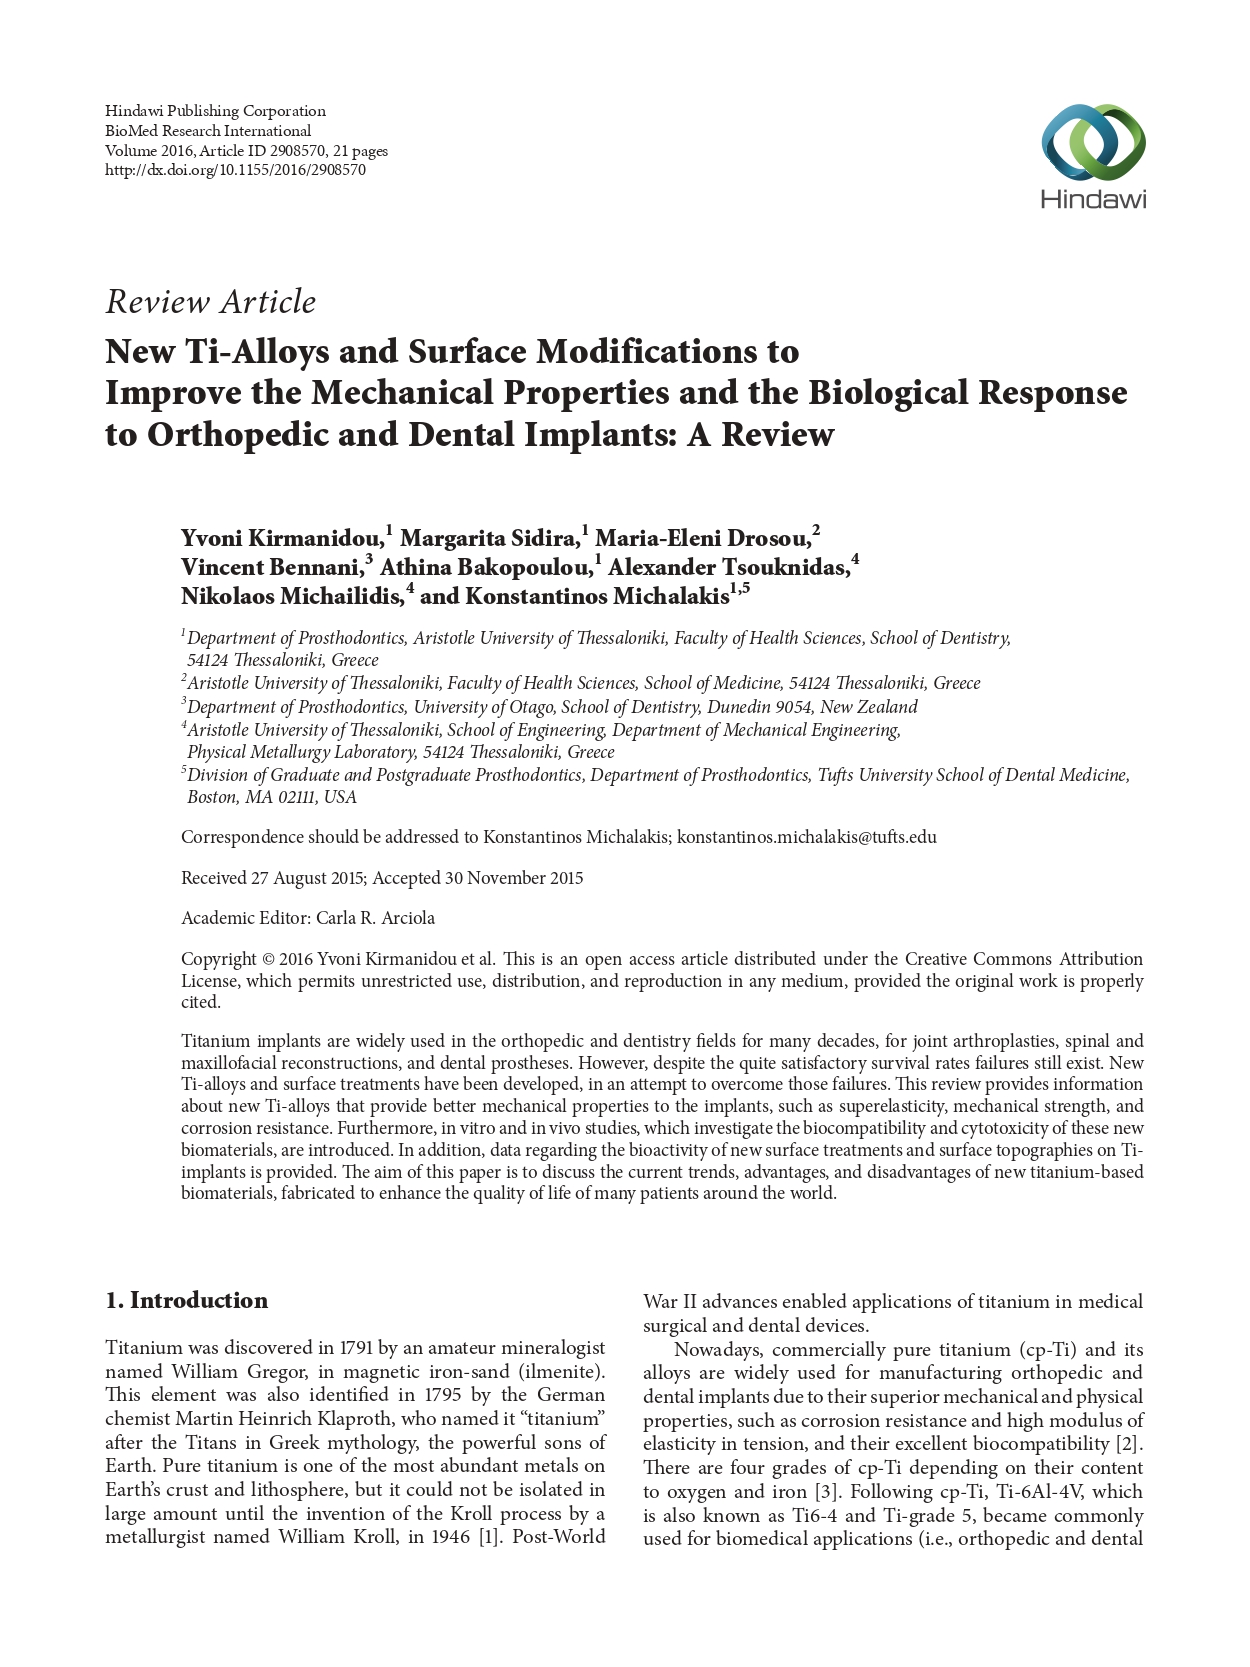 New Ti-Alloys and Surface Modifications to Improve the Mechanical Properties and the Biological Response to Orthopedic and Dental Implants: A Review